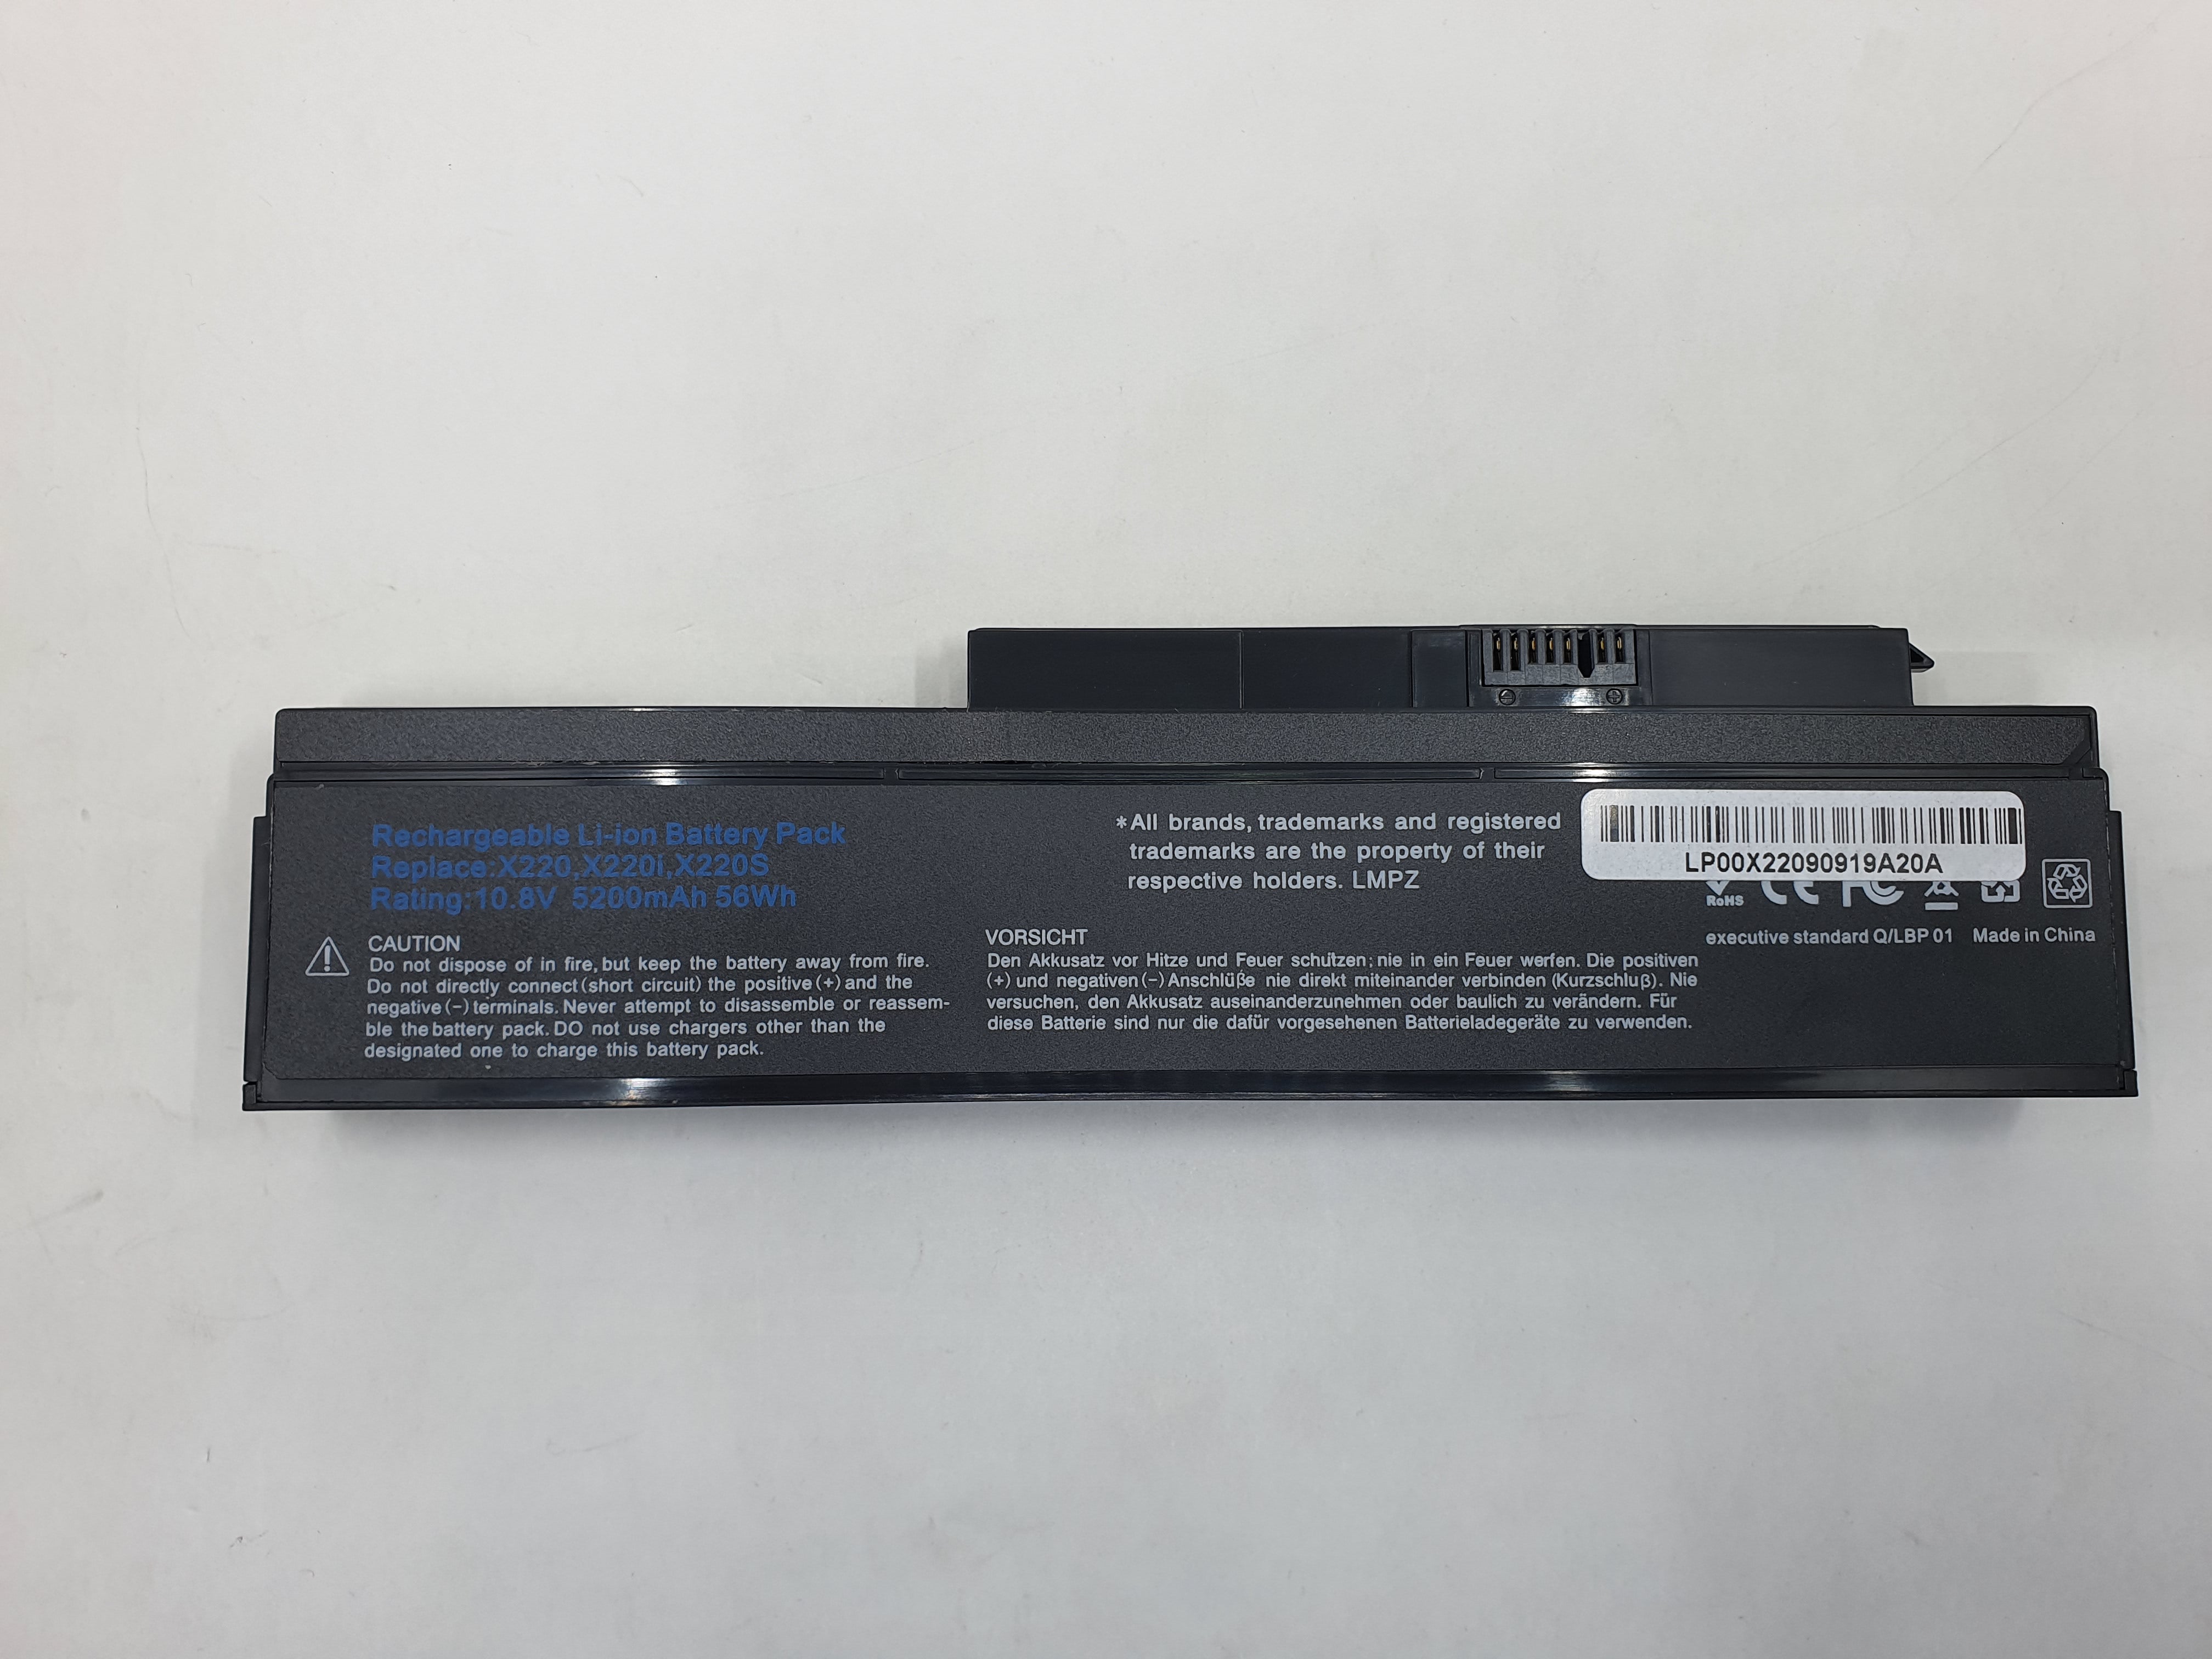 Lenovo A1 Battery X220 for Replacement - Lenovo ThinkPad X220